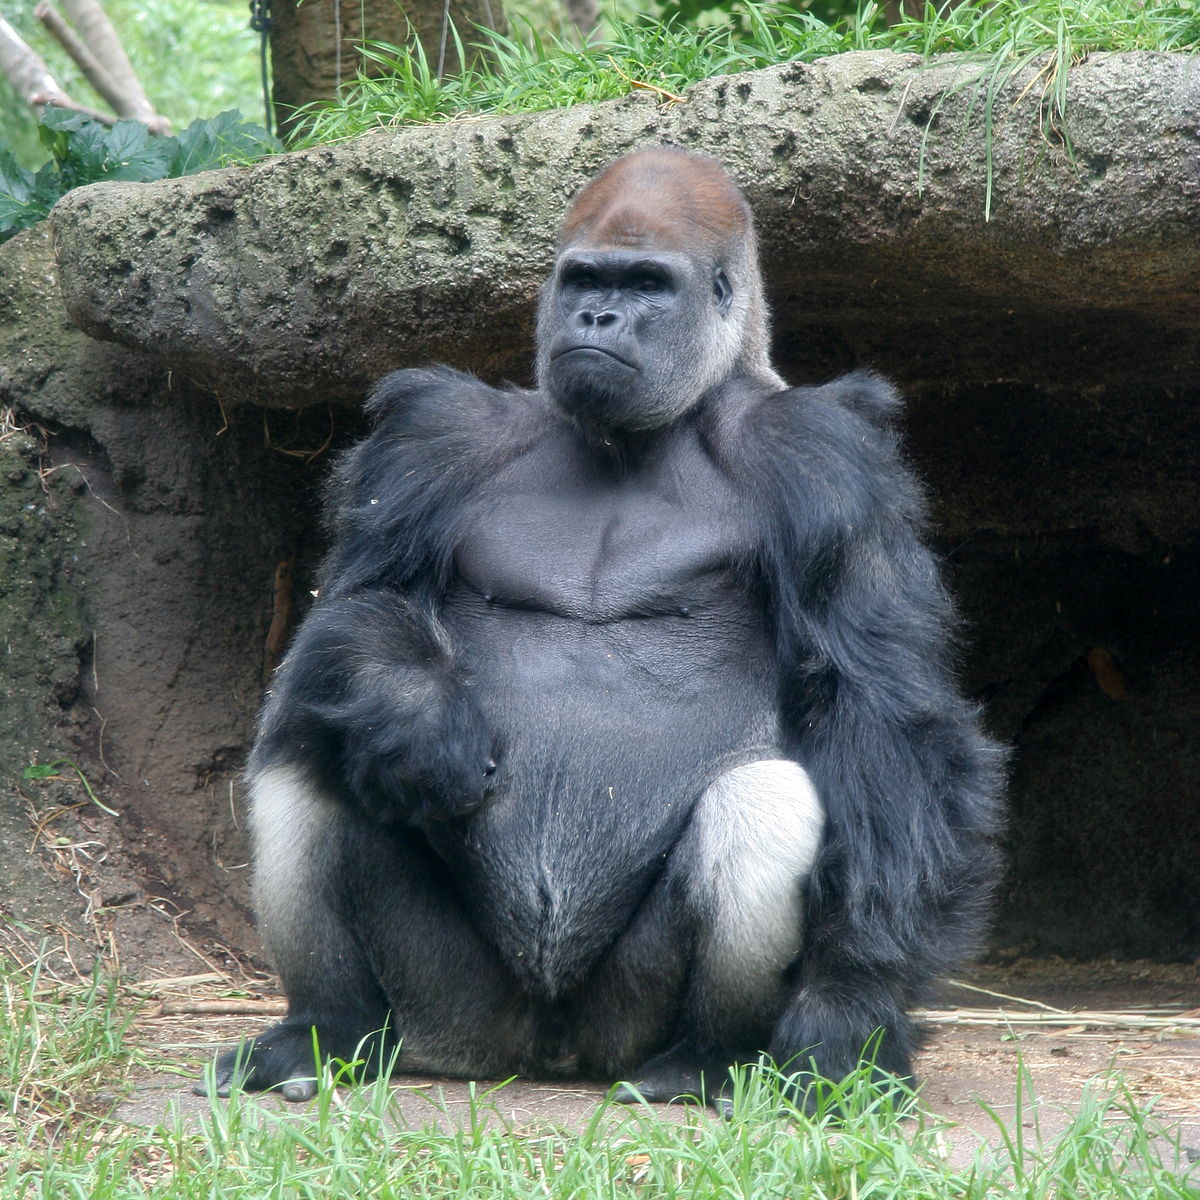 worlds largest gorilla ever recorded